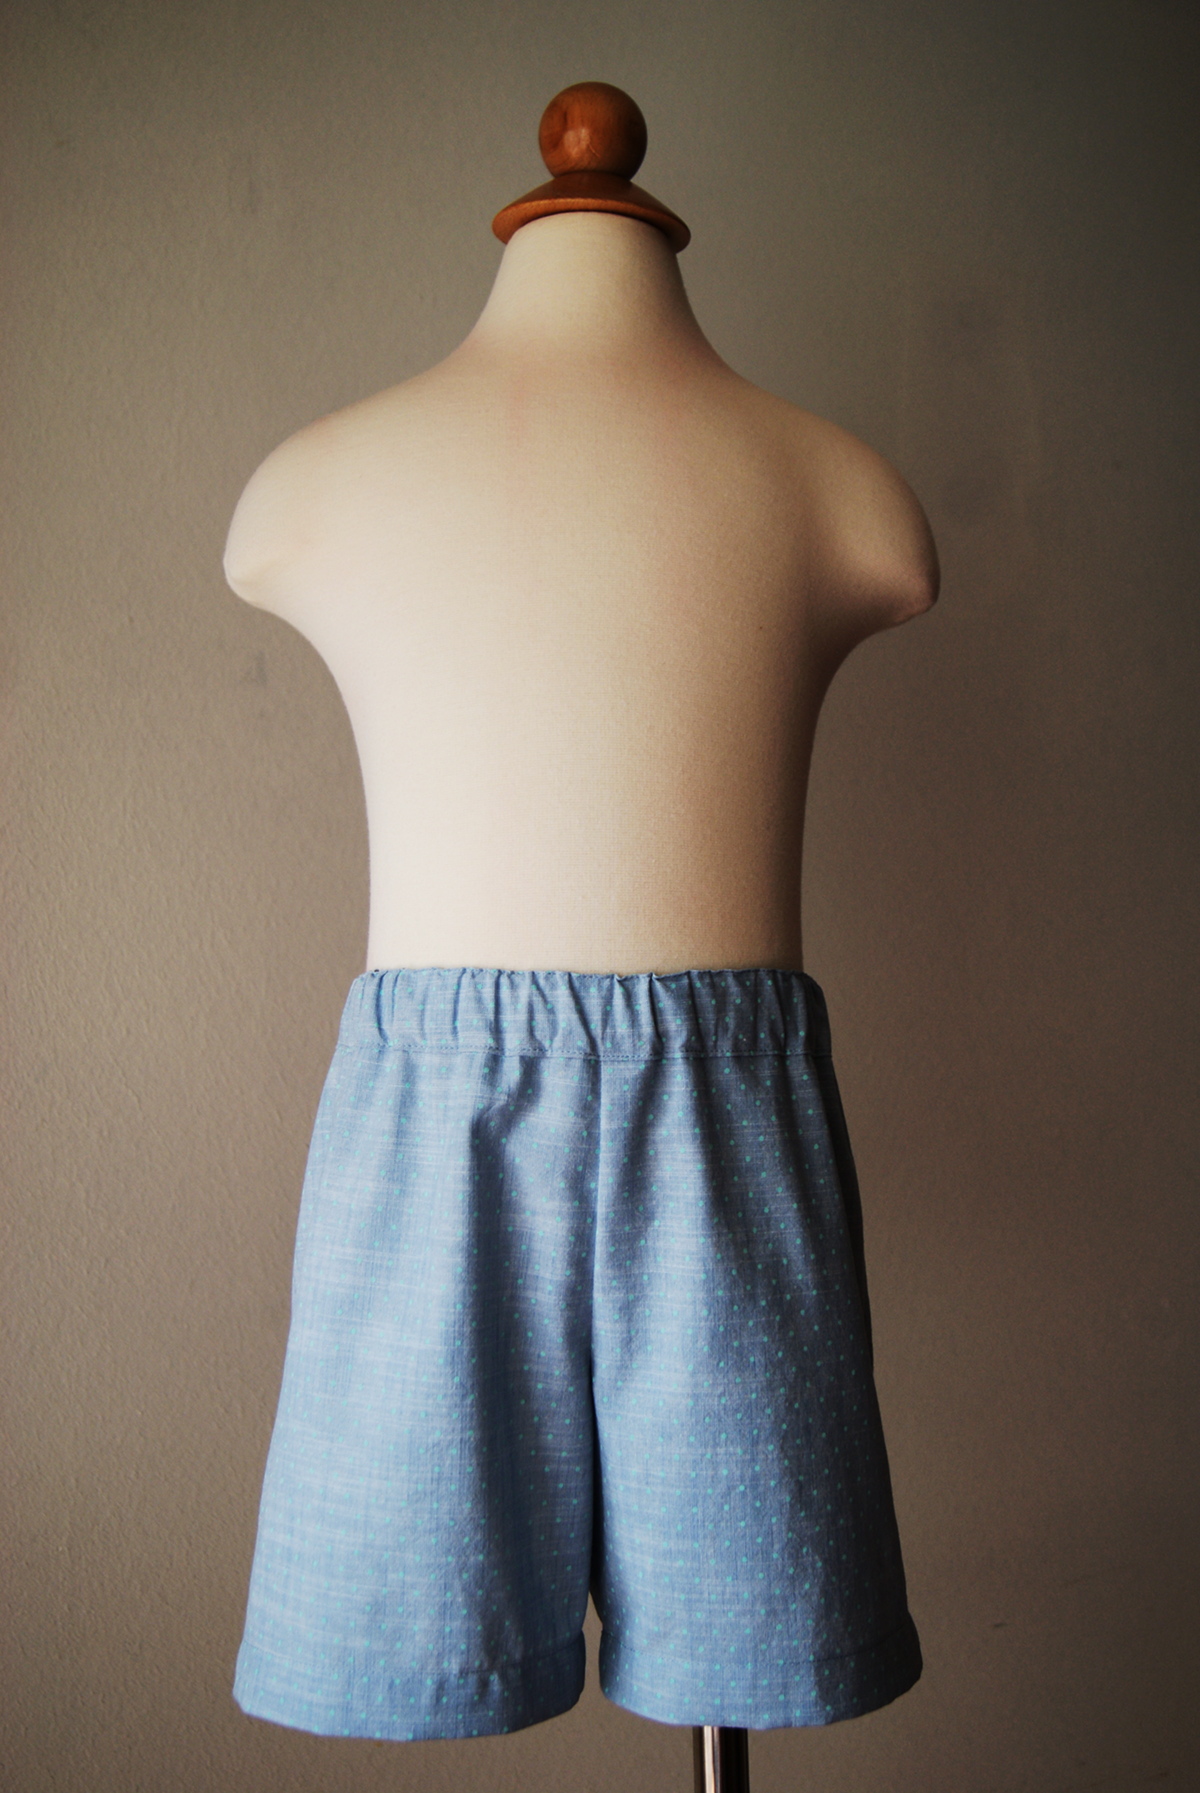 How to cut and sew a short/ elastic waist band short/ beginners